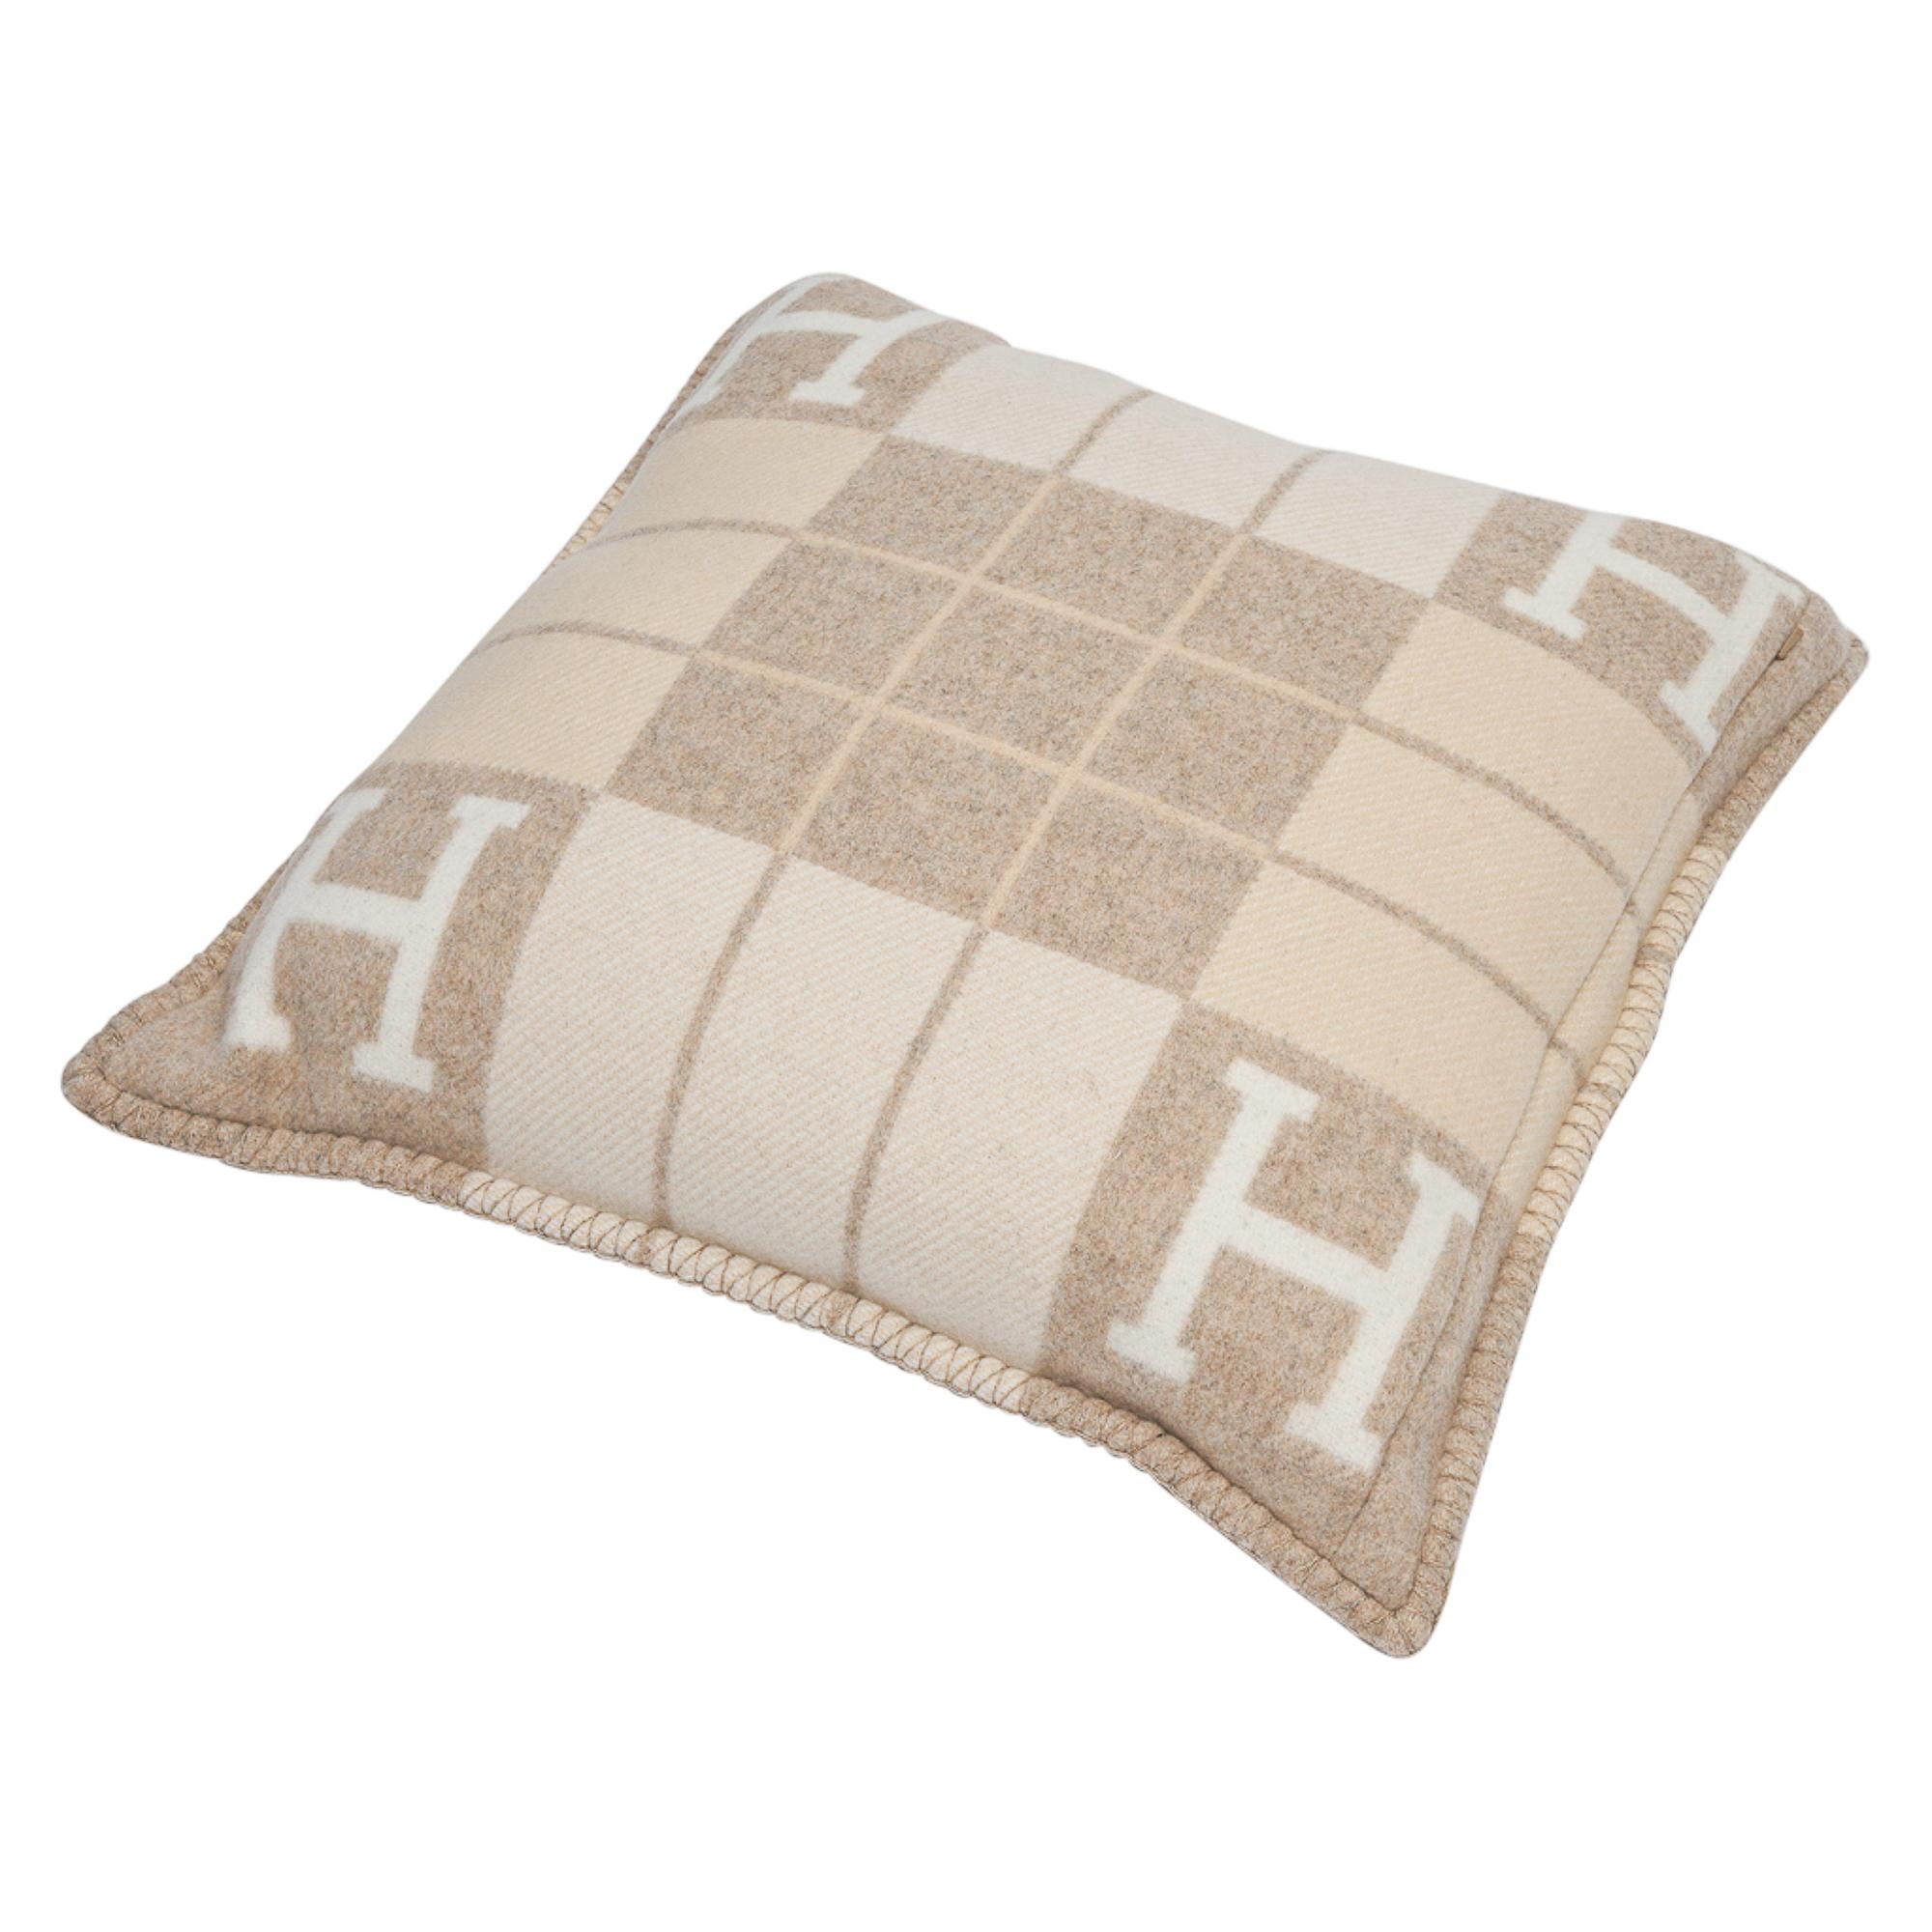 Guaranteed authentic Hermes classic PM Avalon III signature H pillow Coco and Camomille.
The removable cover is created from 85% Wool and 15% cashmere and has whip stitch edges.
Comes with sleeper.
New or Pristine Store Fresh Condition. 
Please see